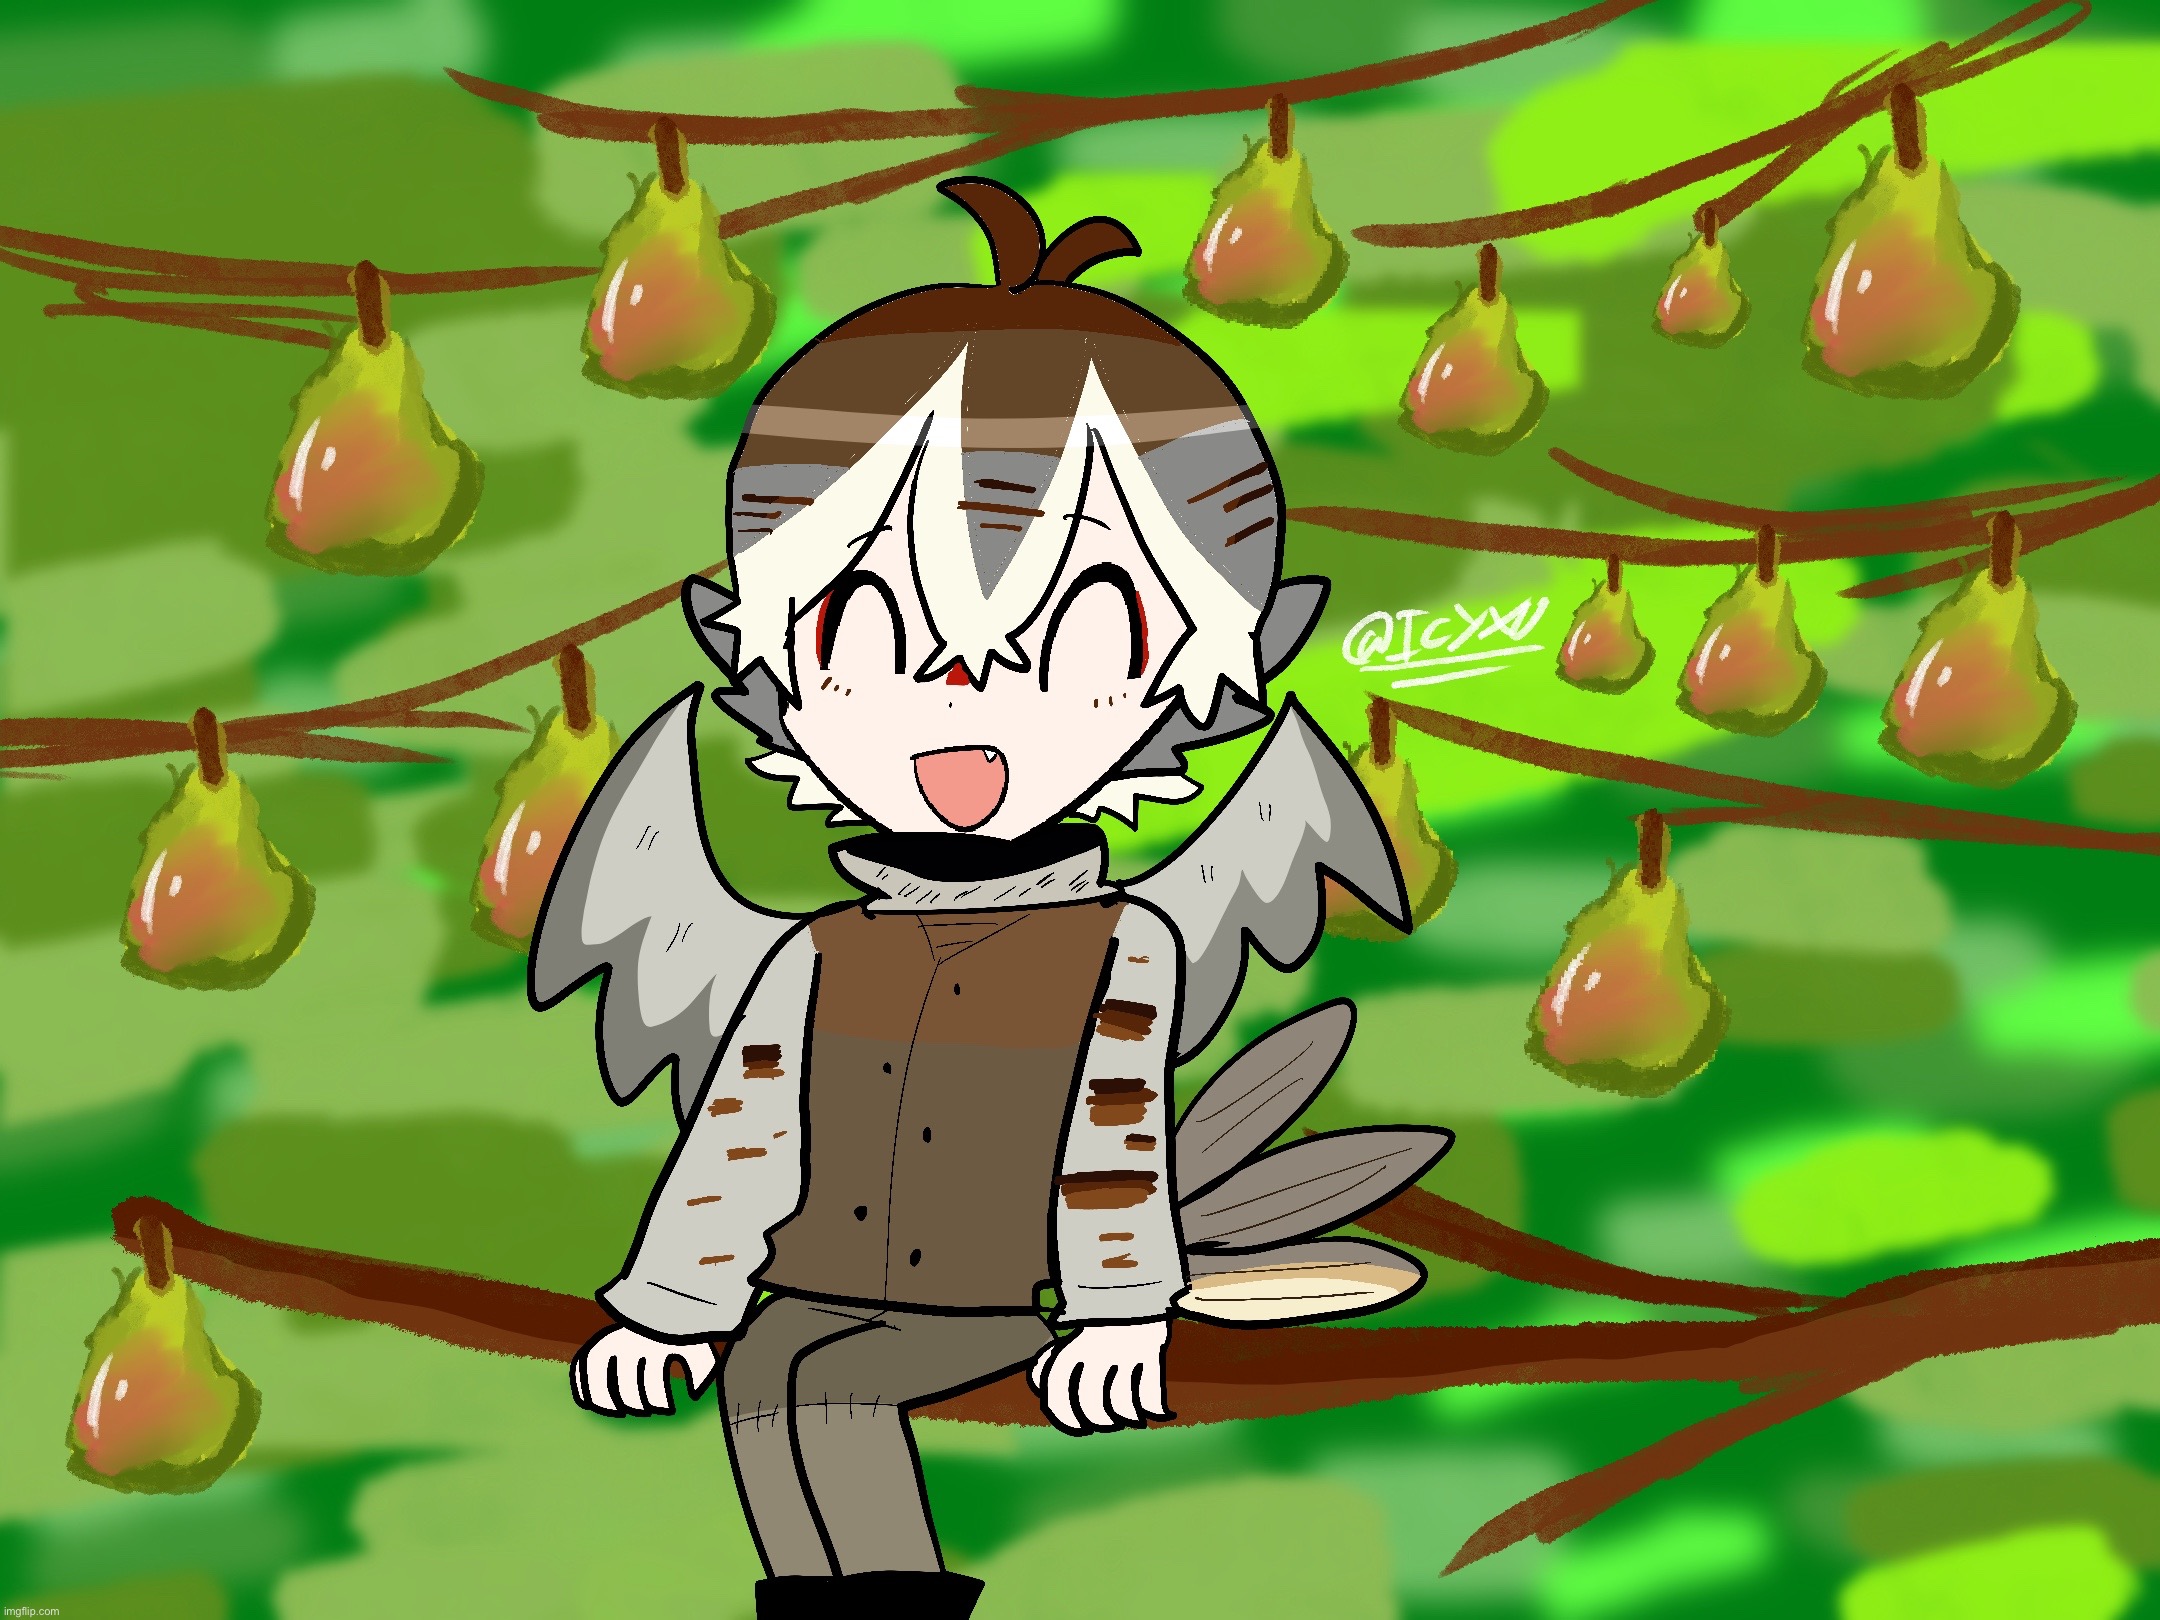 12 Days of Christmast Day 1: A Partridge in a Pear Tree | image tagged in 12 days of christmas,anime,bird,avian | made w/ Imgflip meme maker